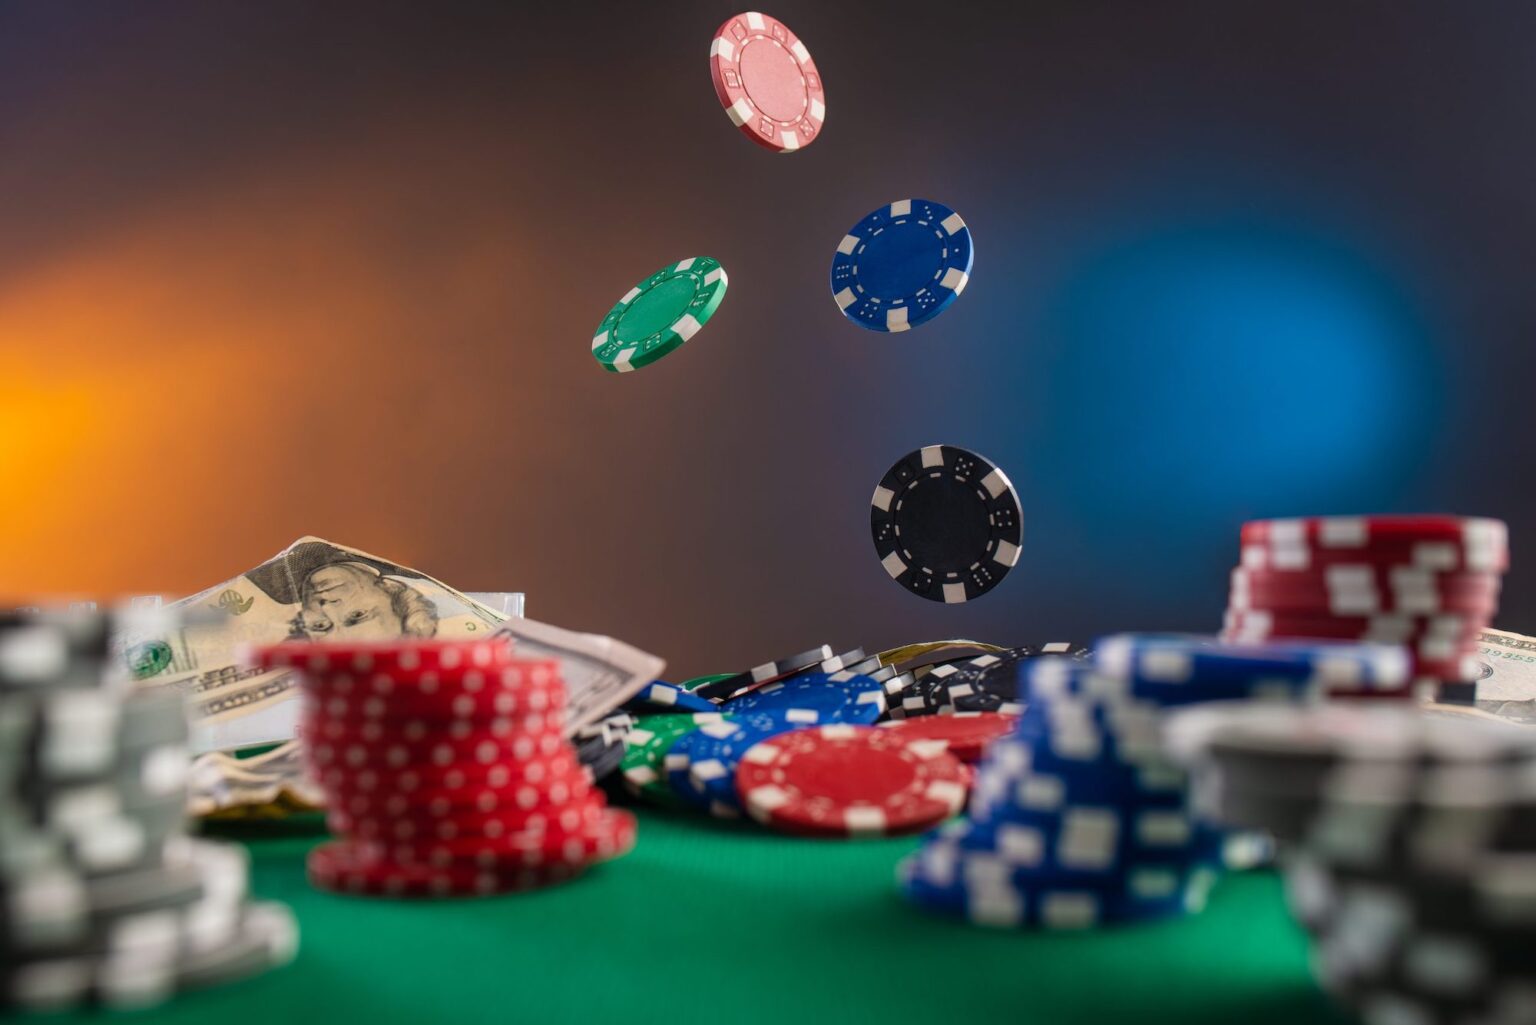 Do you know where the best states in the U.S. are for gambling? This list might shock you, especially since Nevada isn't listed! Check it out.